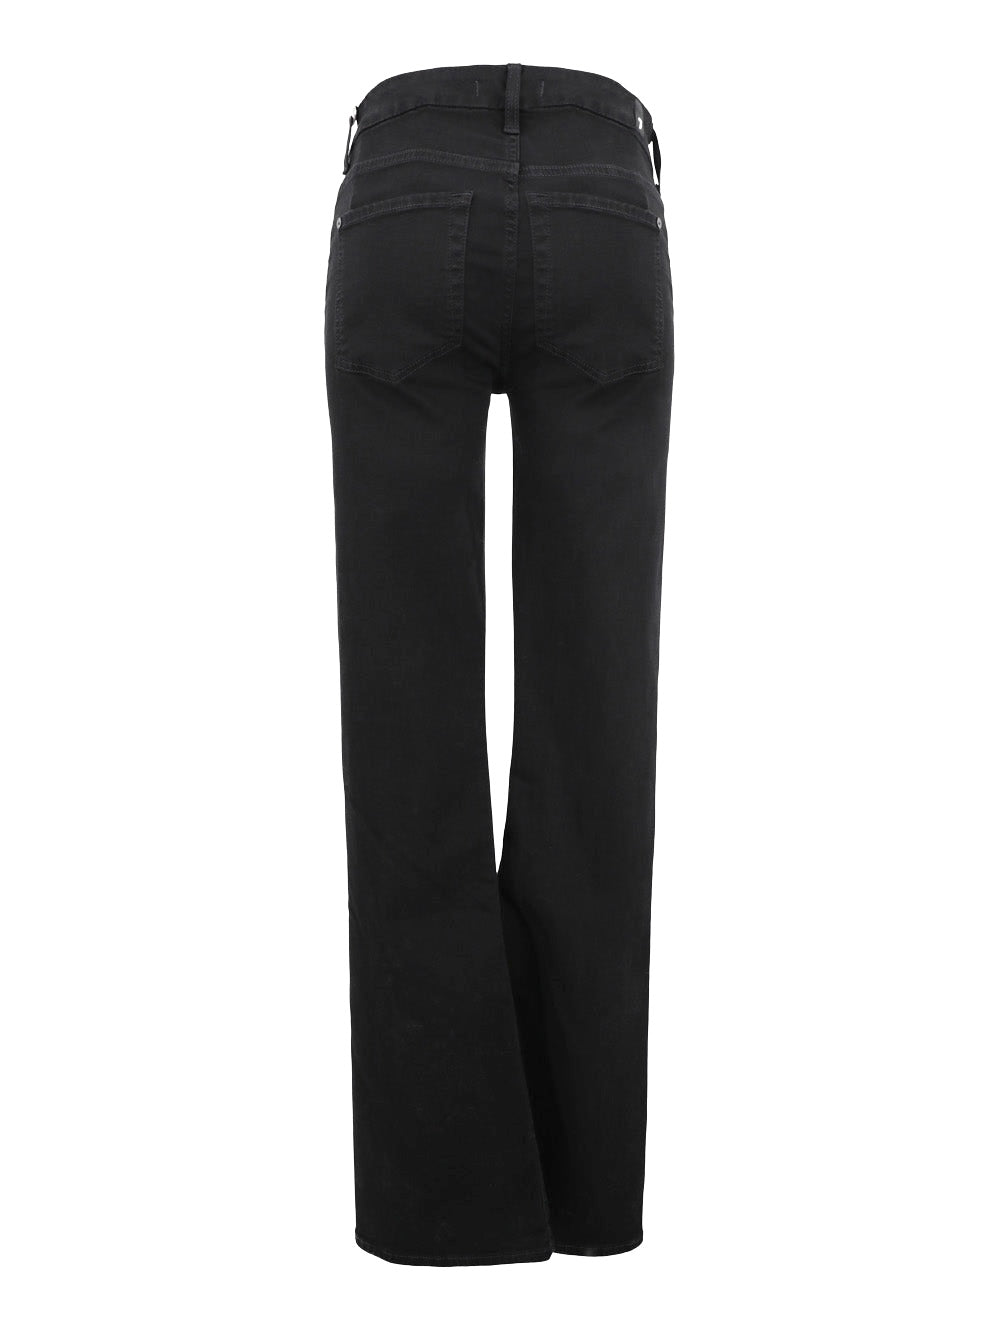 7 For All Mankind B(Air) Kimmie Bootcut Jeans in Rinsed Black